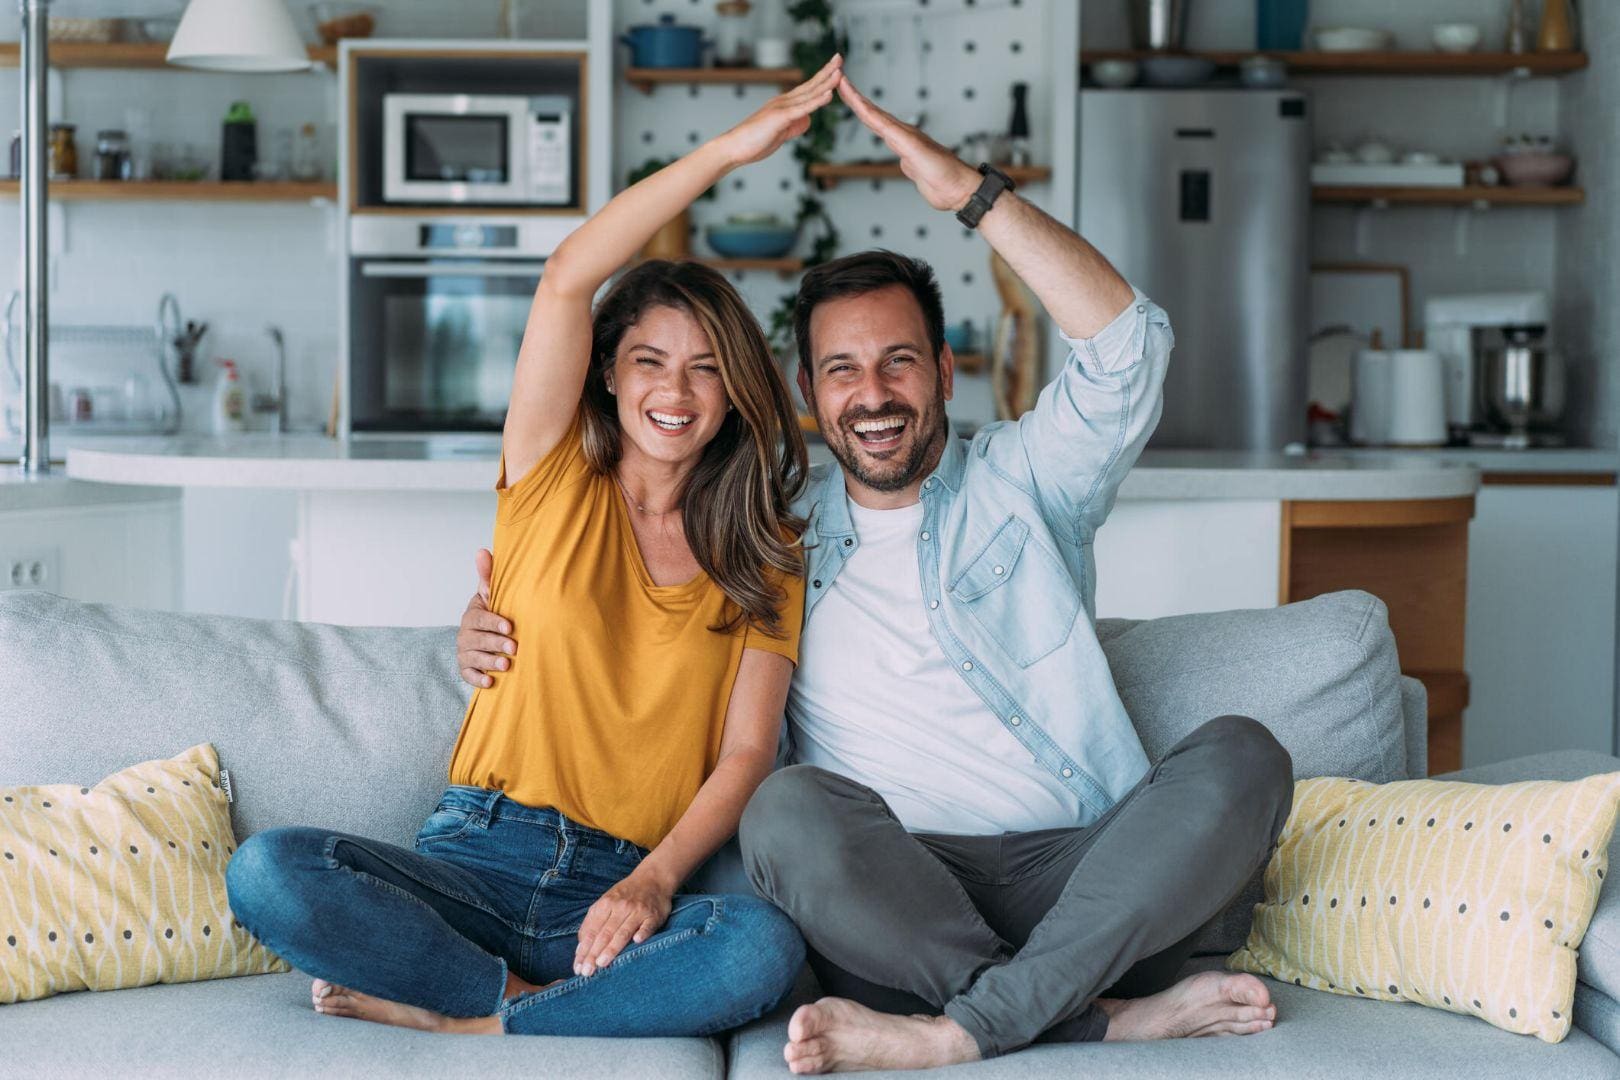 A man and woman sitting on the couch with their hands in the air.